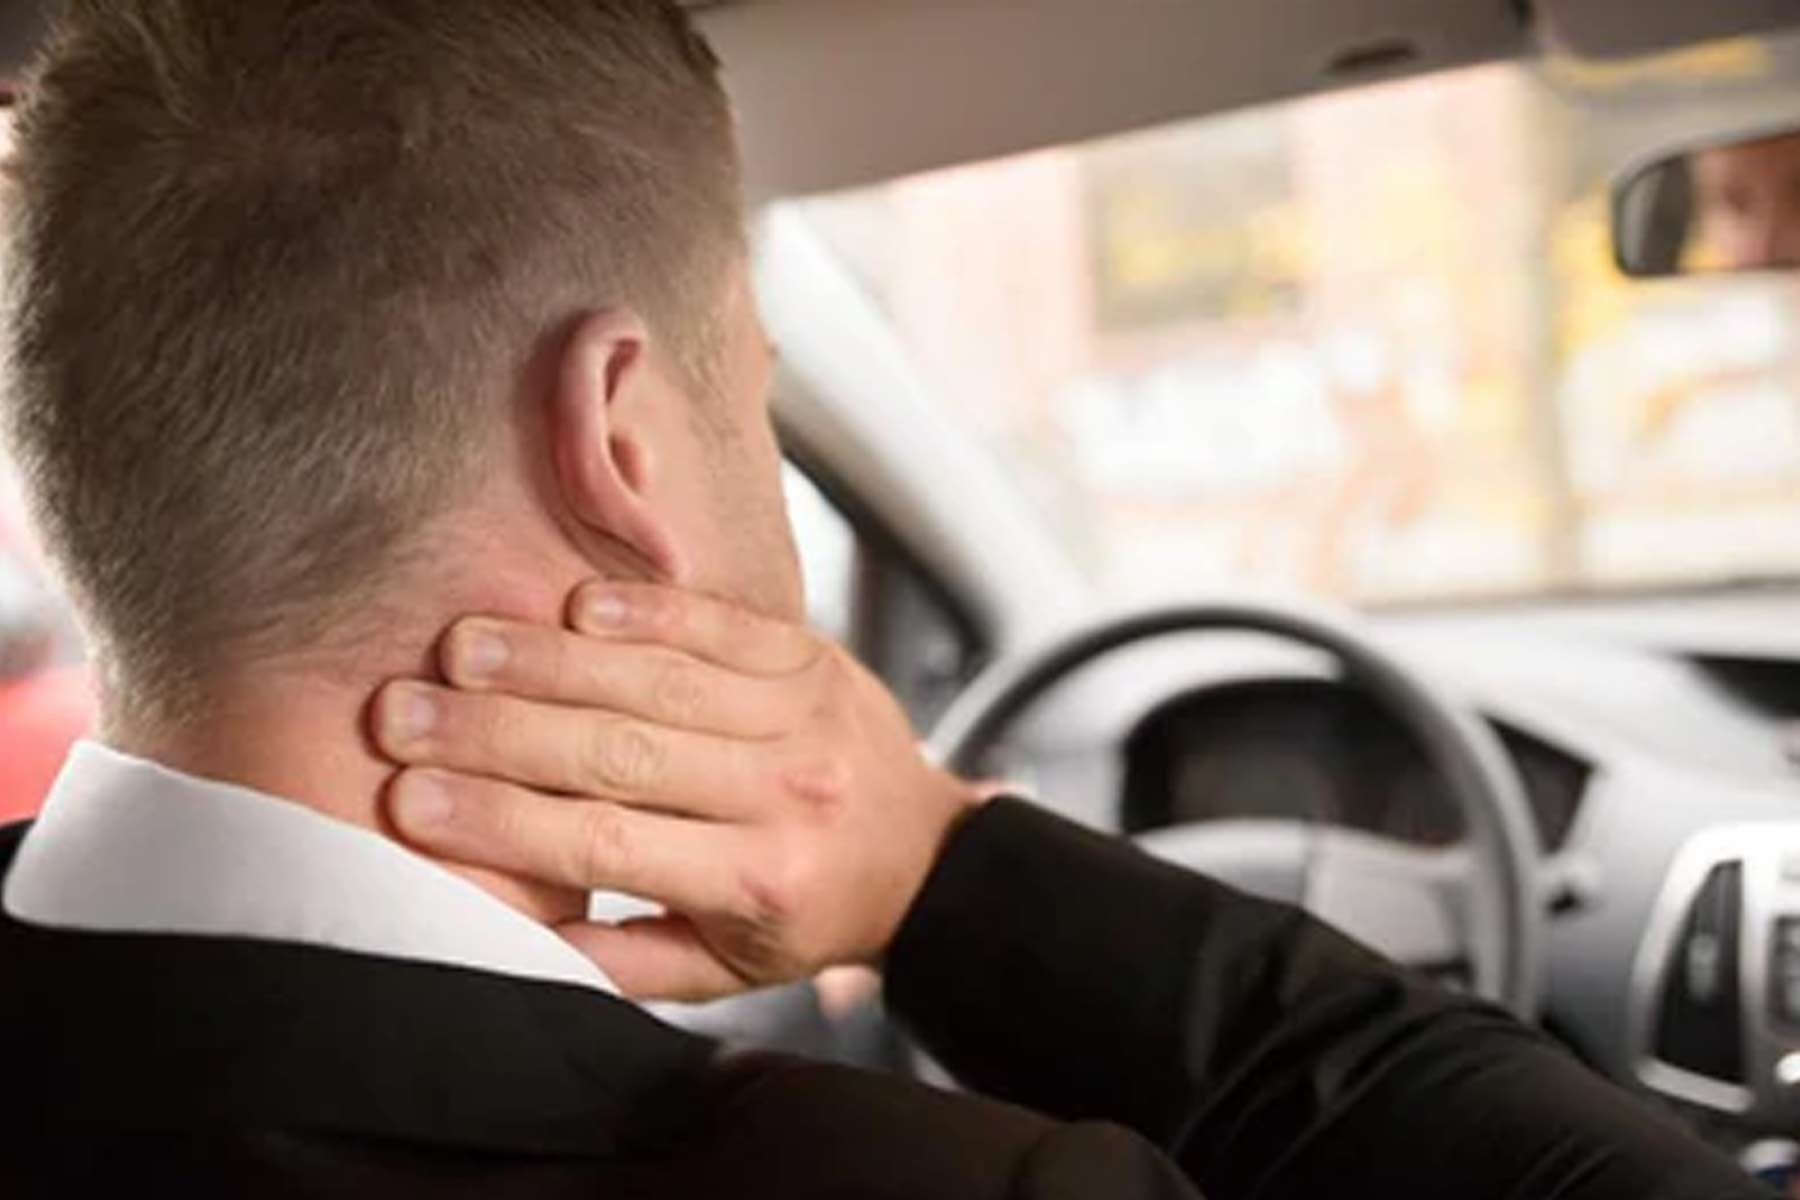 7 Tips To Keep Truck Driver Back Pain From Happening - Drive MW